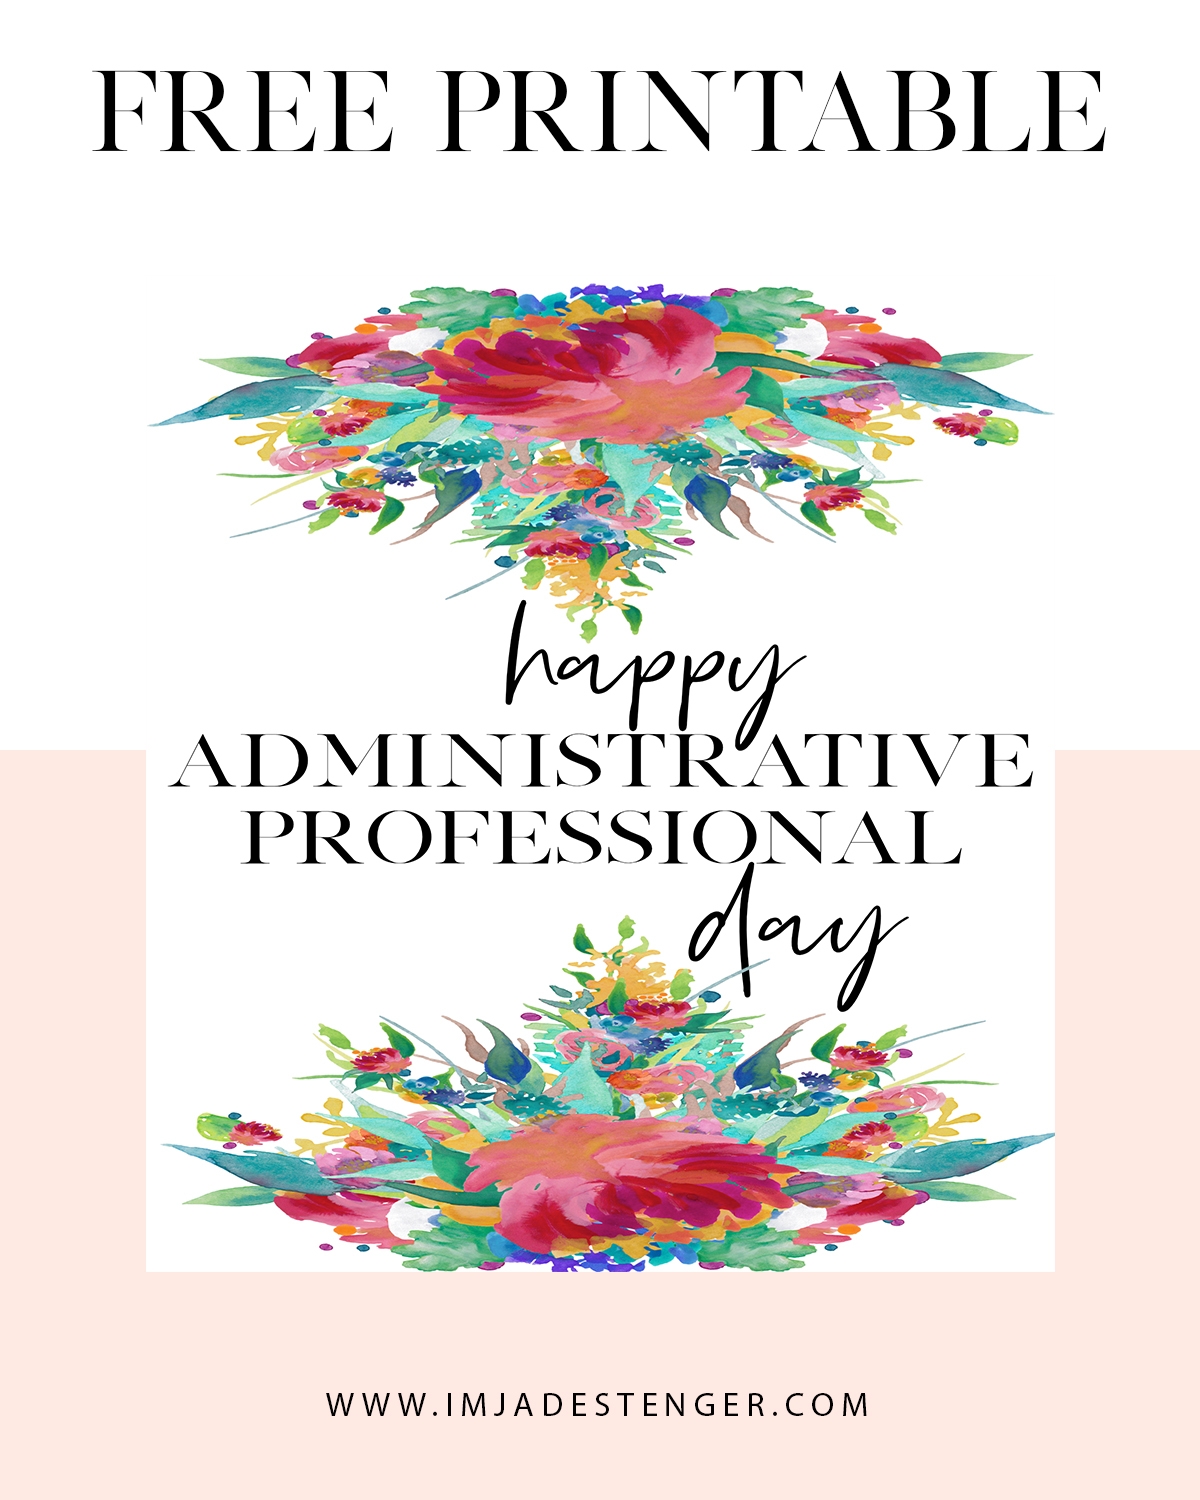 Free Printable Celebrating Administrative Professional Day I m Jade Stenger - Administrative Professionals Cards Printable Free